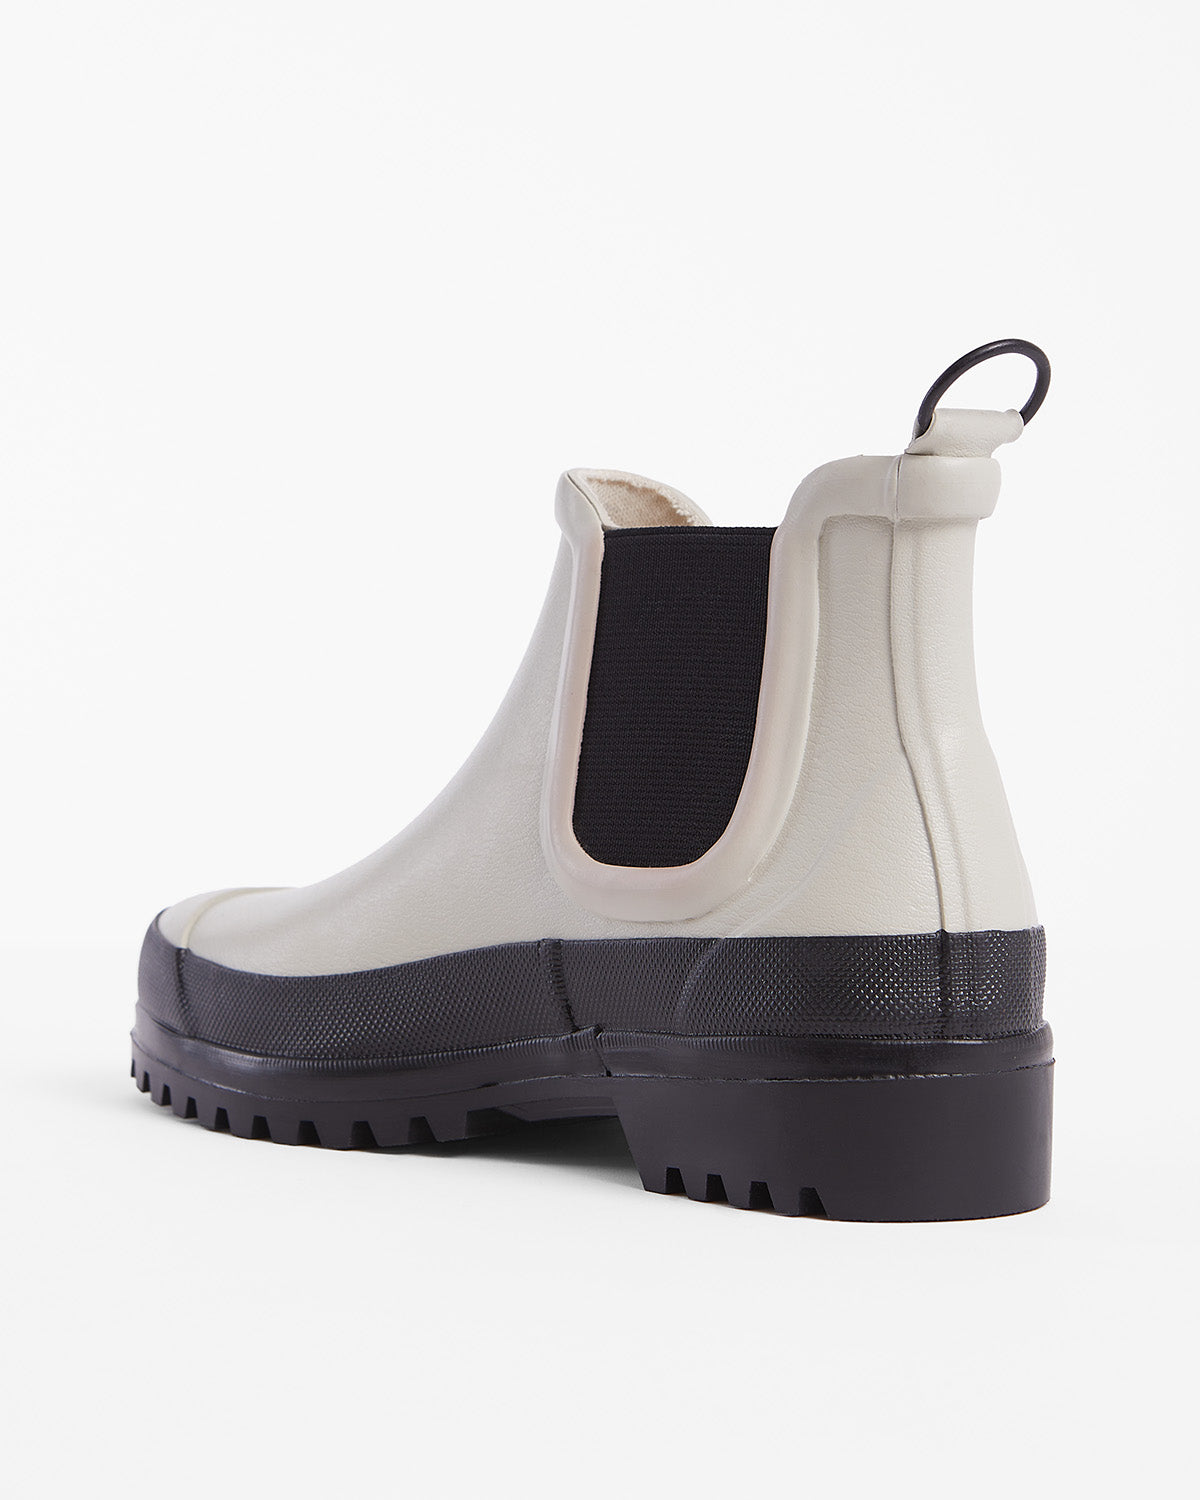 Chelsea Rainboots in color Oyster with black sole by Ilse Jacobsen